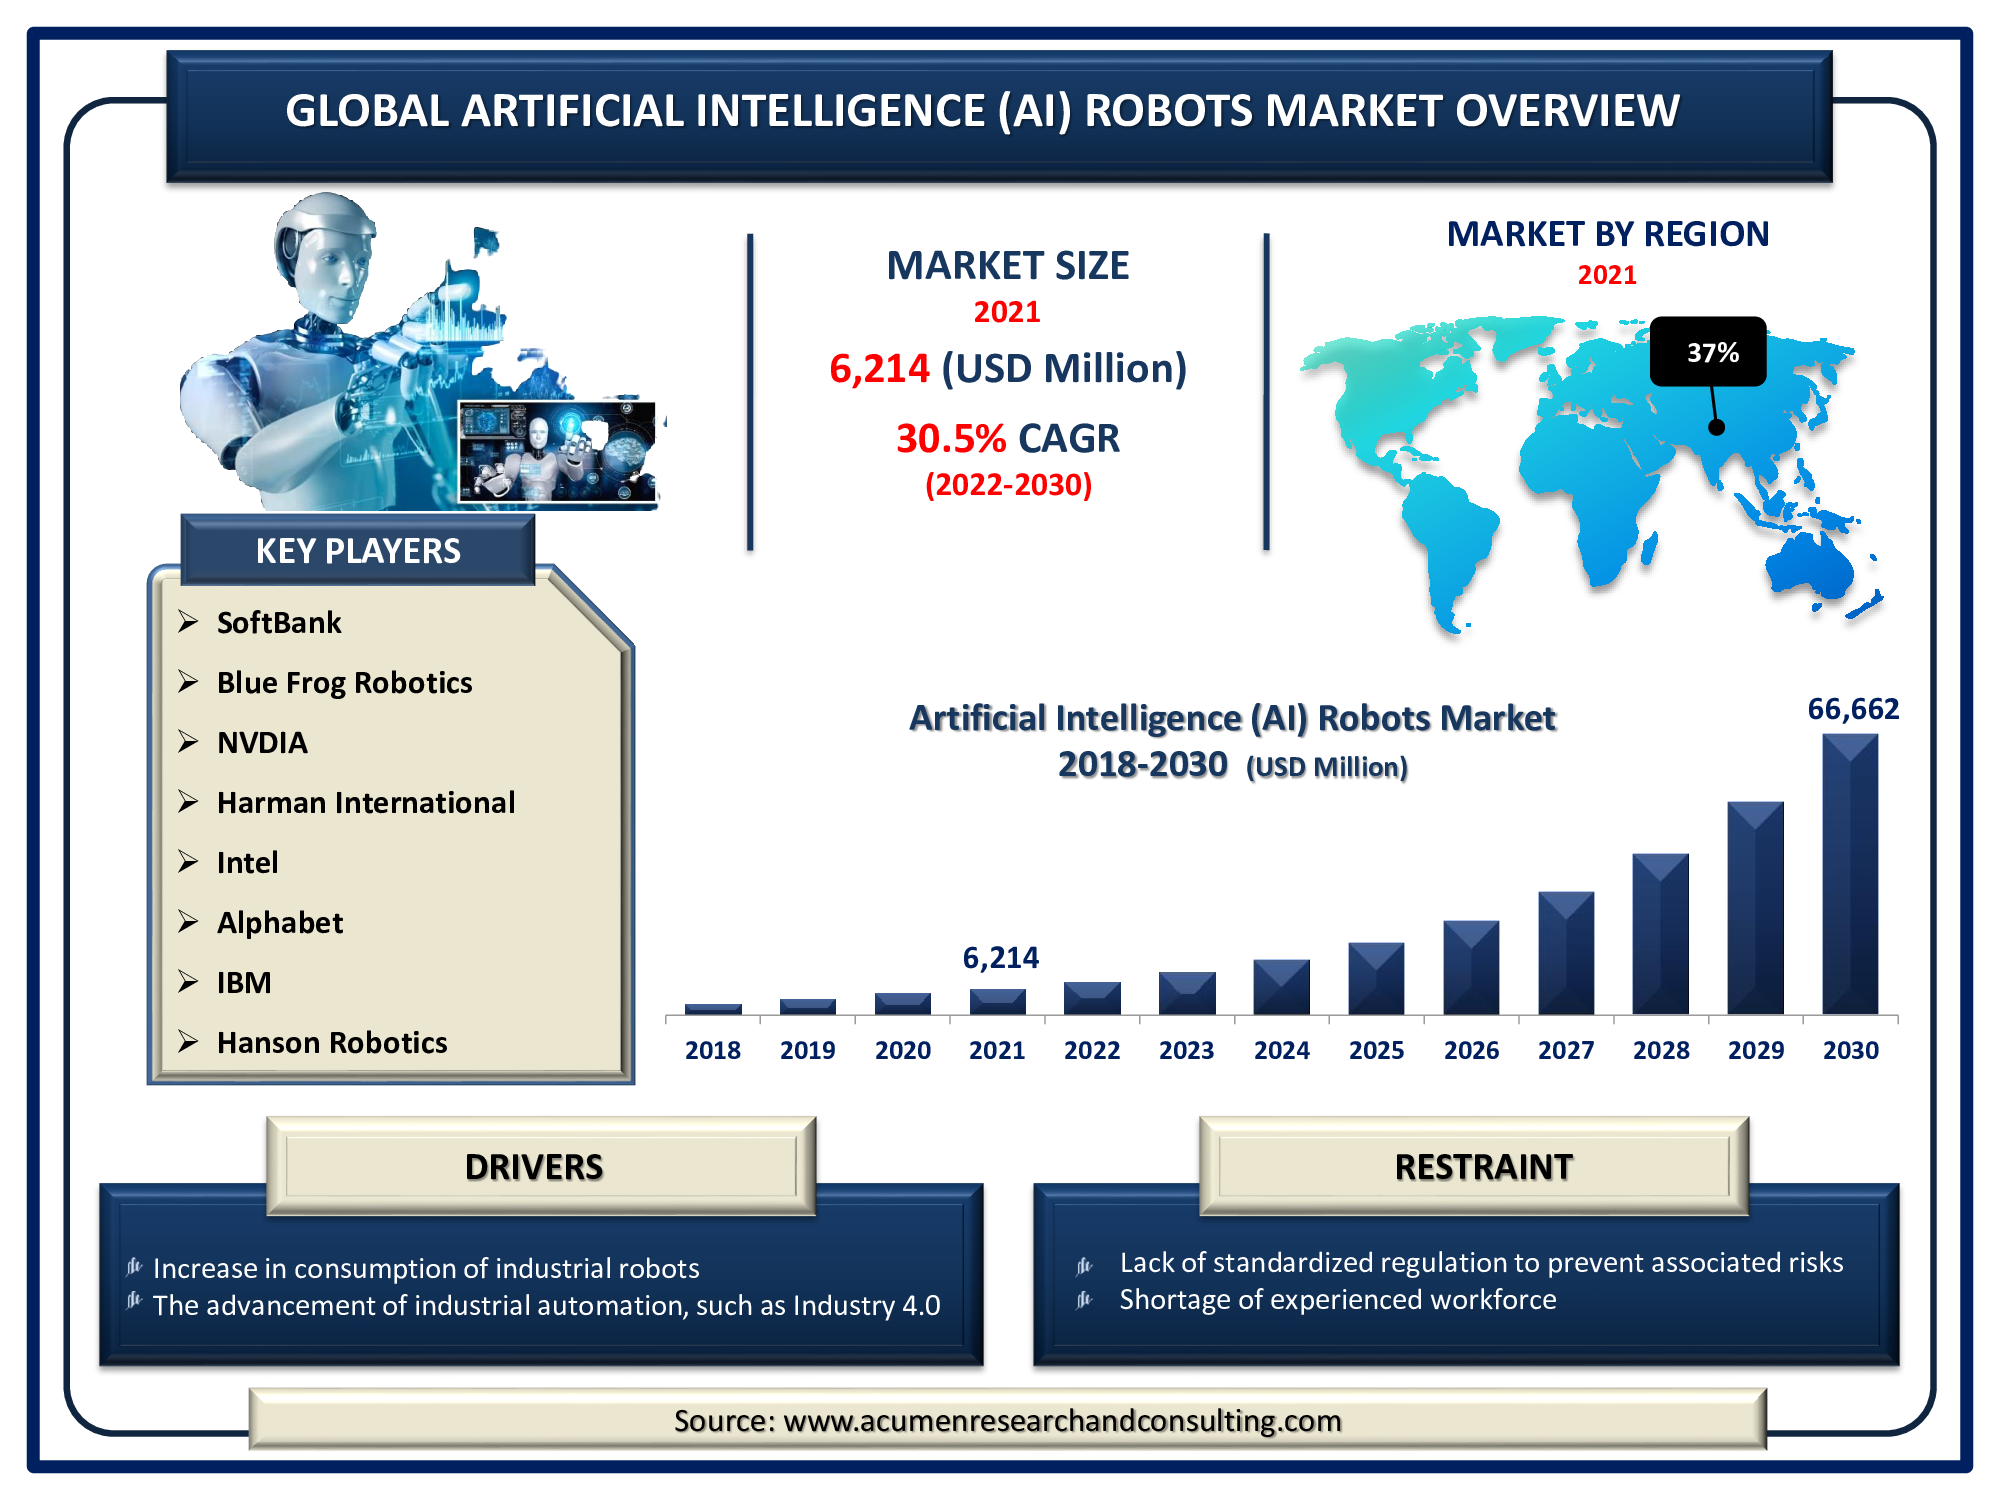 Artificial Intelligence Robots Market size was valued at USD 6,214 Million in 2021 and is expected to reach USD 66,662 Million by 2030 growing at a CAGR of 30.5% during the forecast period from 2022 to 2030.